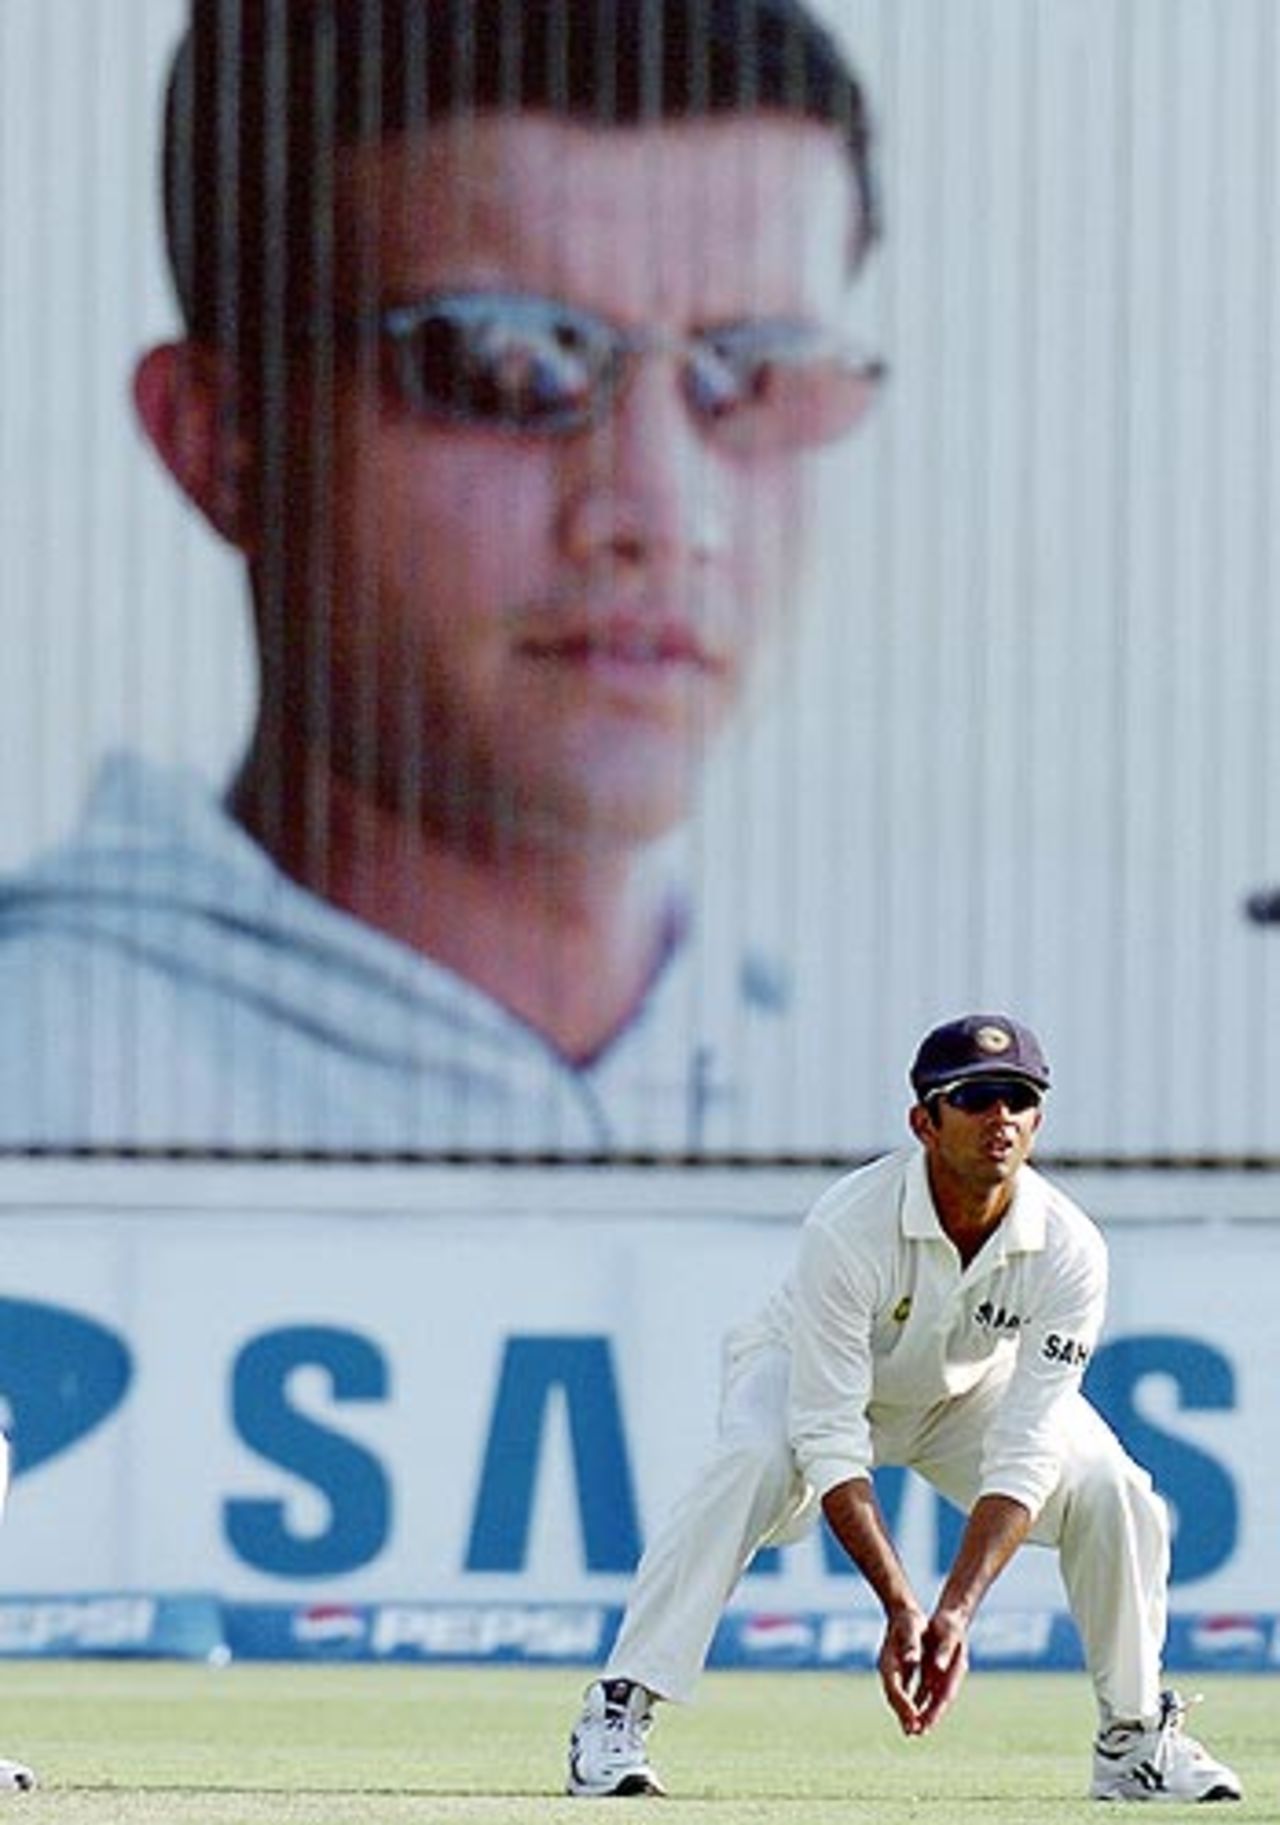 He's not there but he's watching you ... - A Sourav Ganguly hoarding towers over Rahul Dravid, Pakistan v India, 1st Test, Multan, 3rd day, March 30, 2004